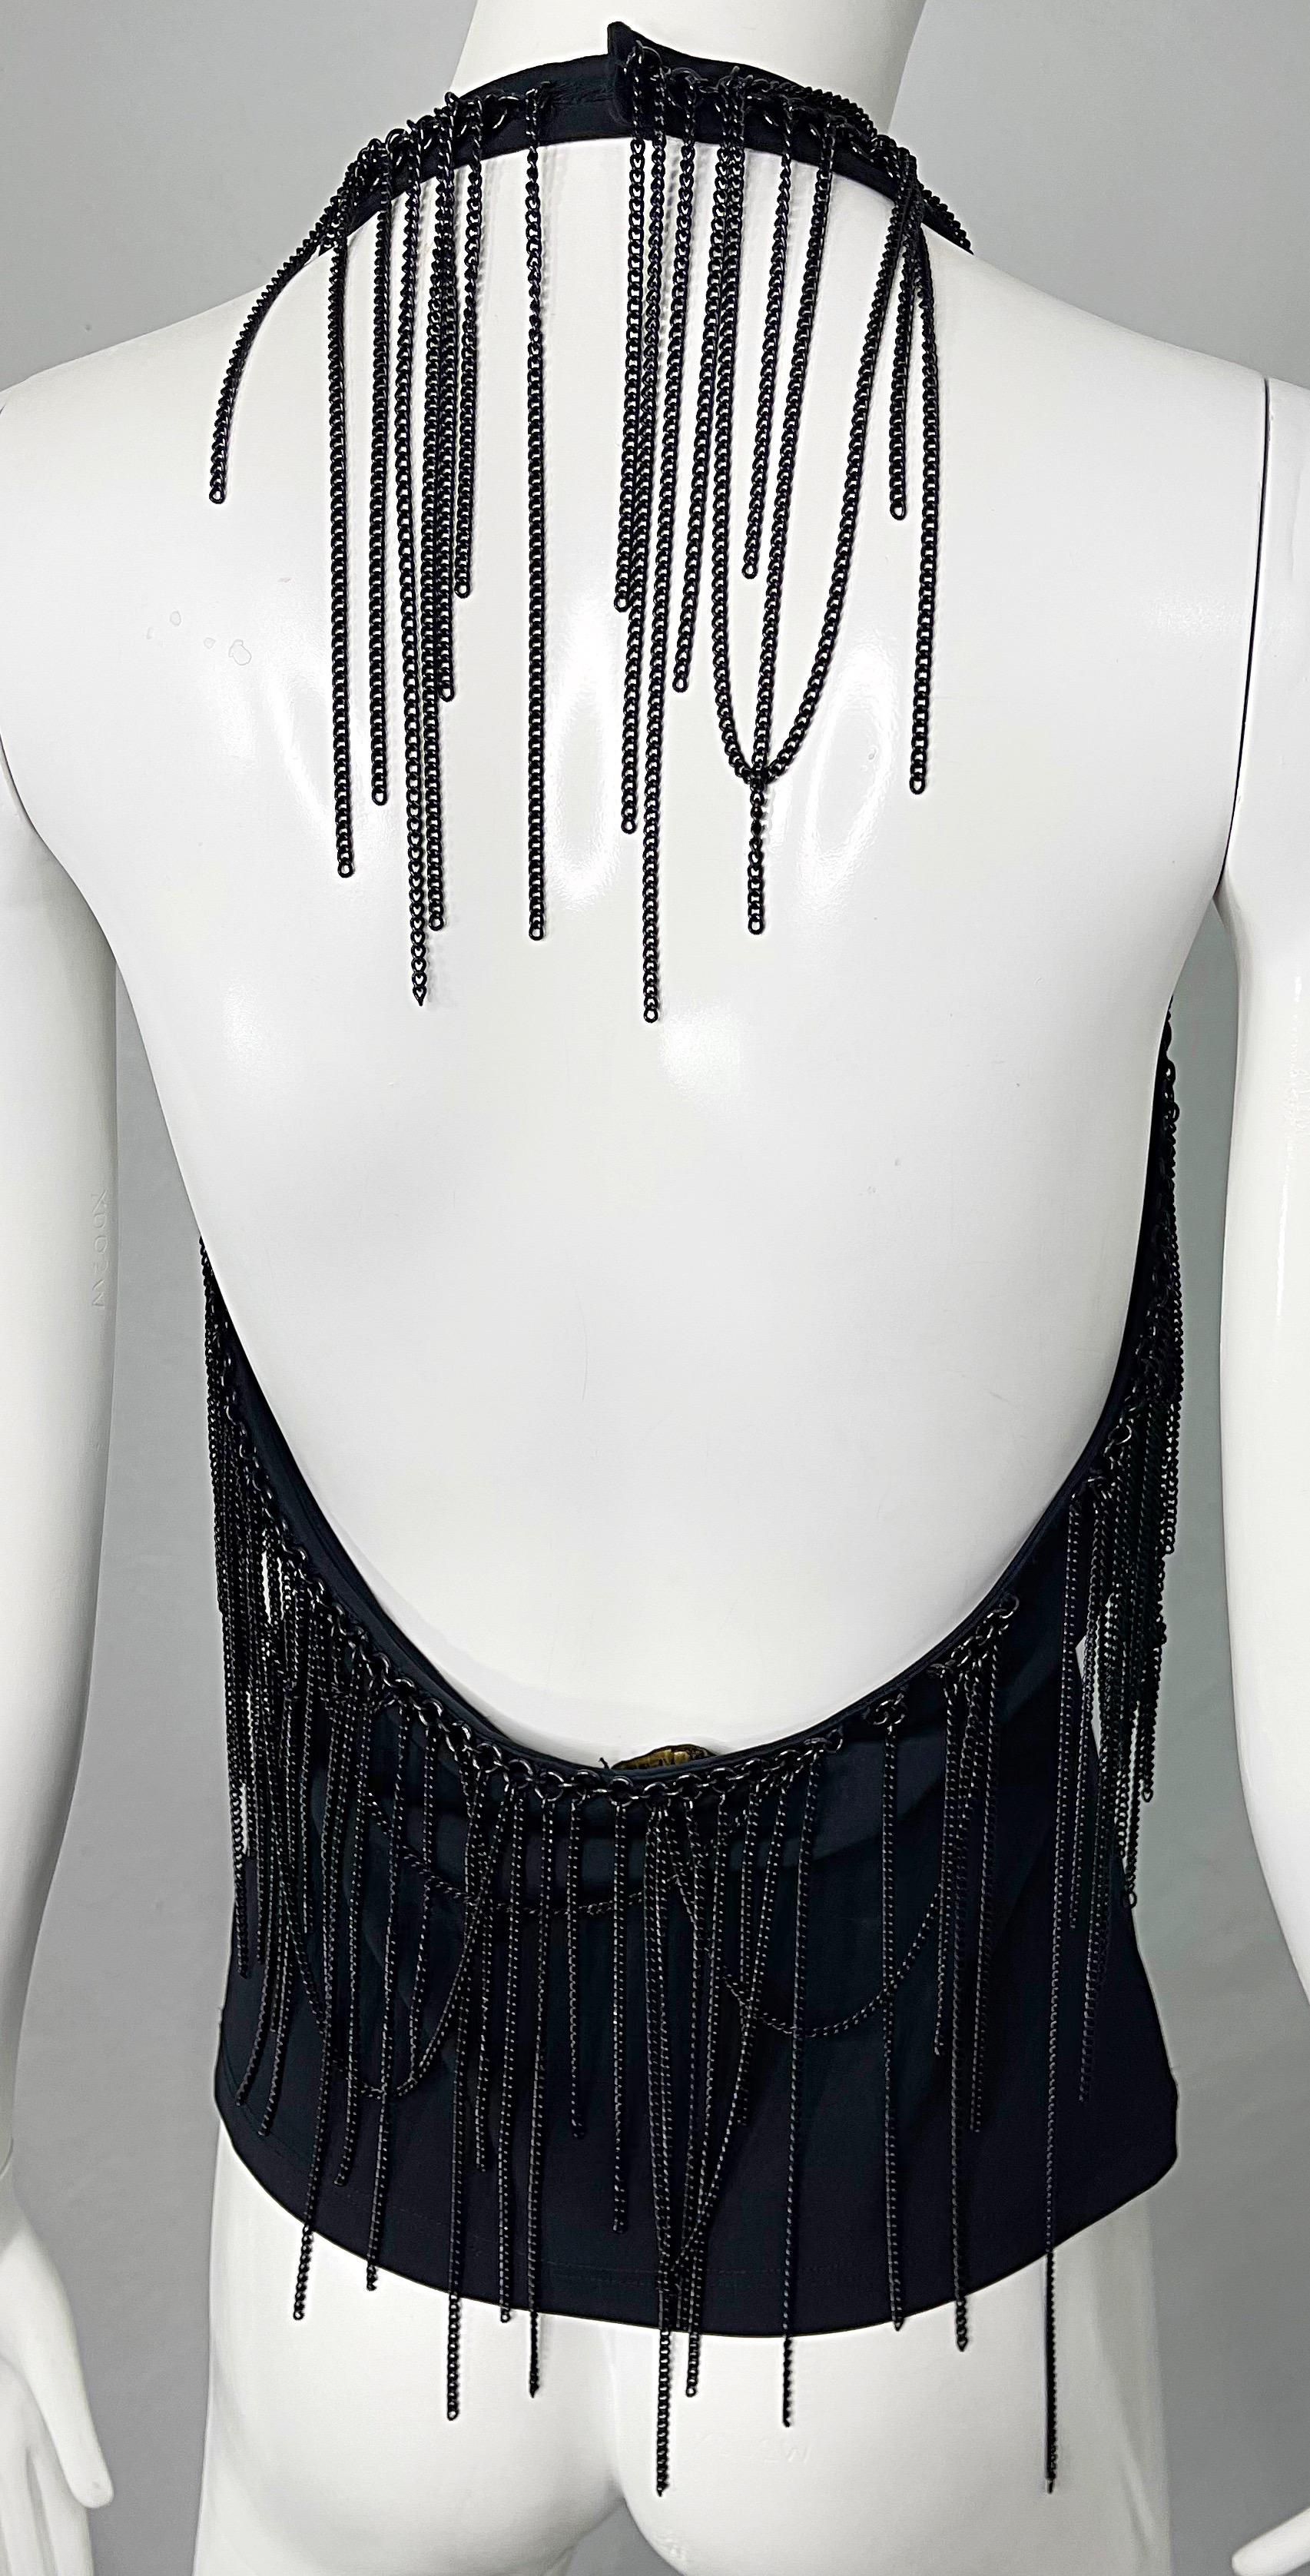 Gianni Versace 2000s Size 44 / 8 10 Black Chain Encrusted Y2K Halter Top Shirt  For Sale 1